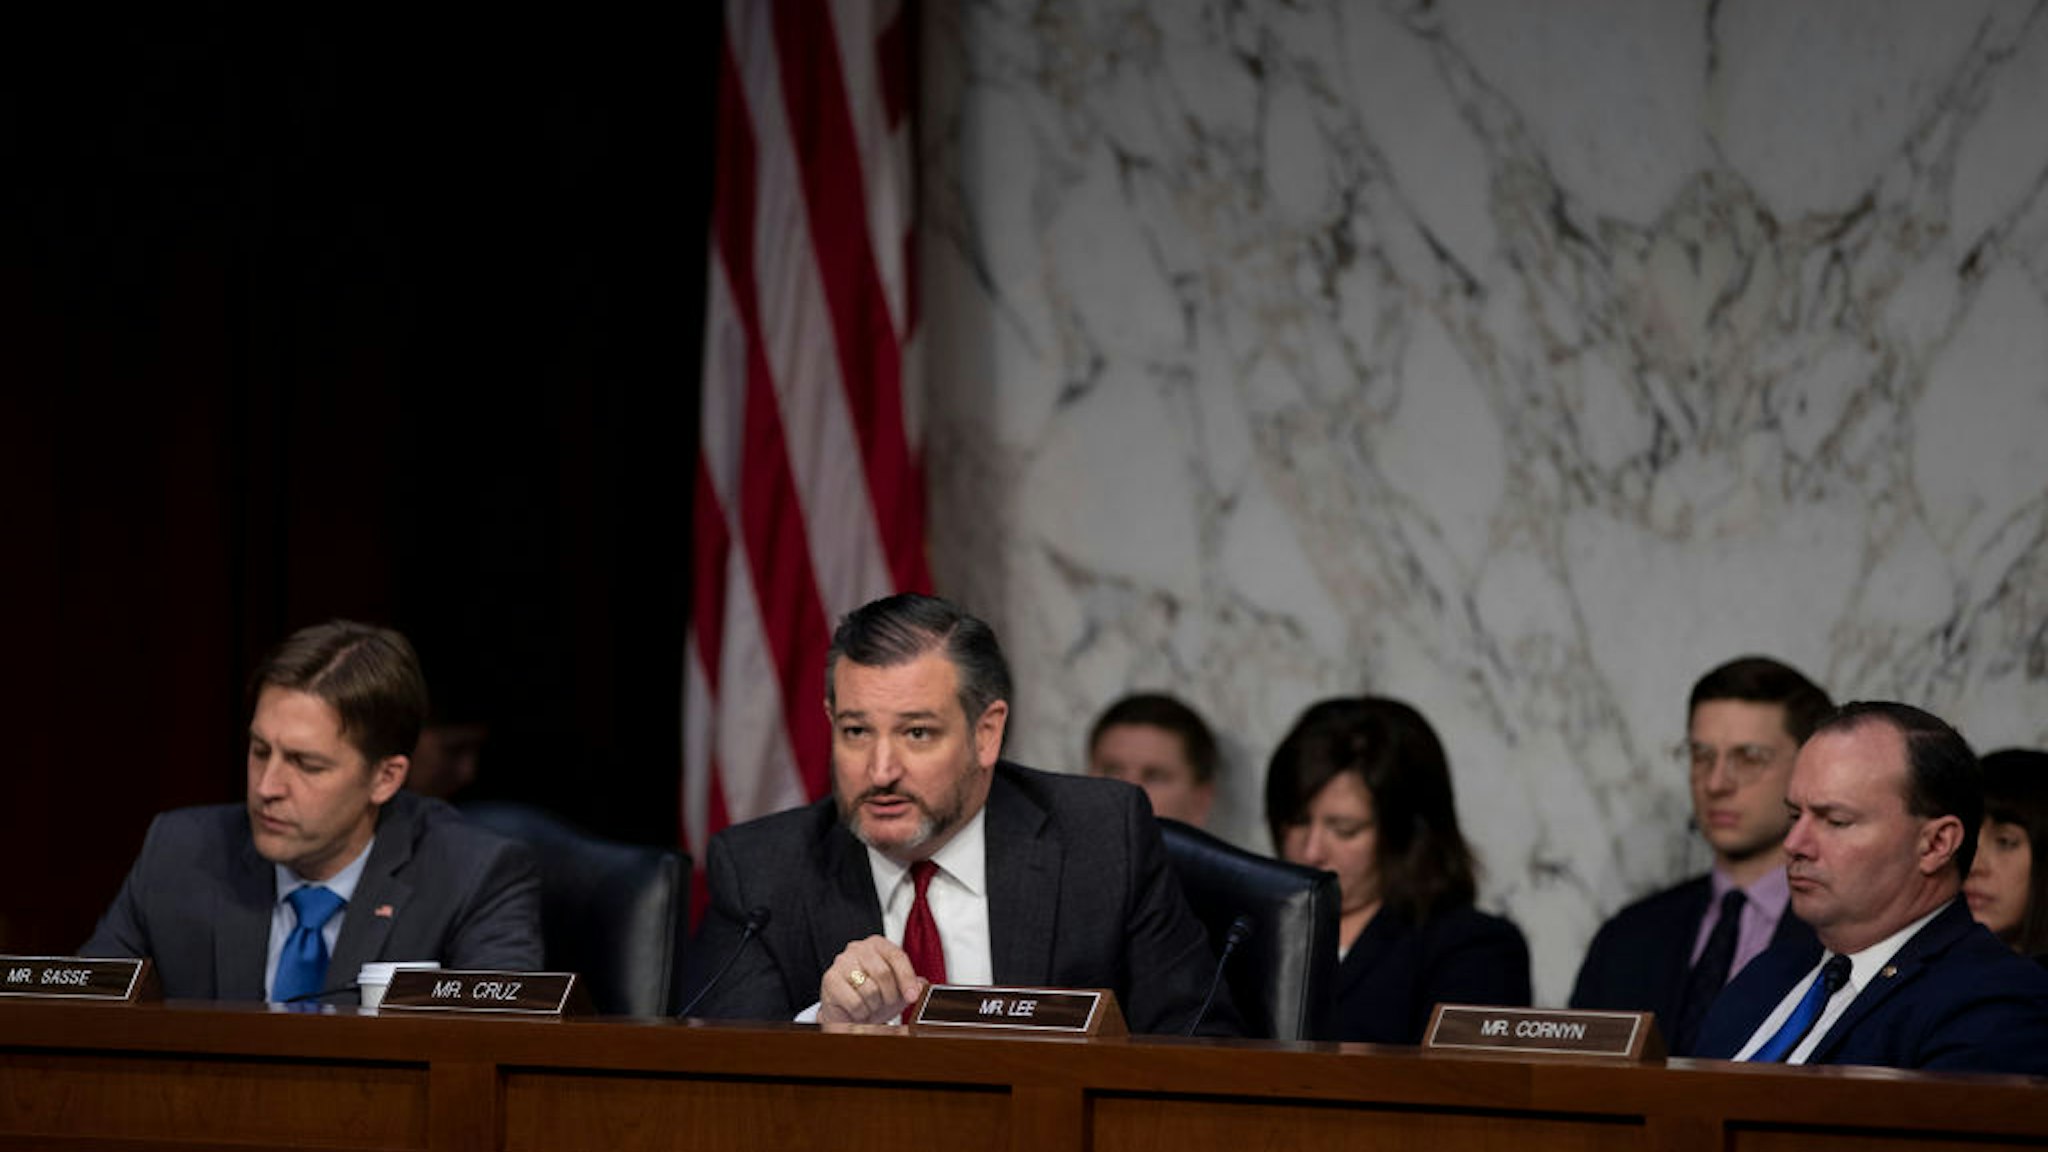 Sen. Ted Cruz (R-TX) asks questions to Michael Horowitz, inspector general for the Justice Department as he testifies before the Senate Judiciary Committee in the Hart Senate Office Building on December 11, 2019 in Washington, DC.